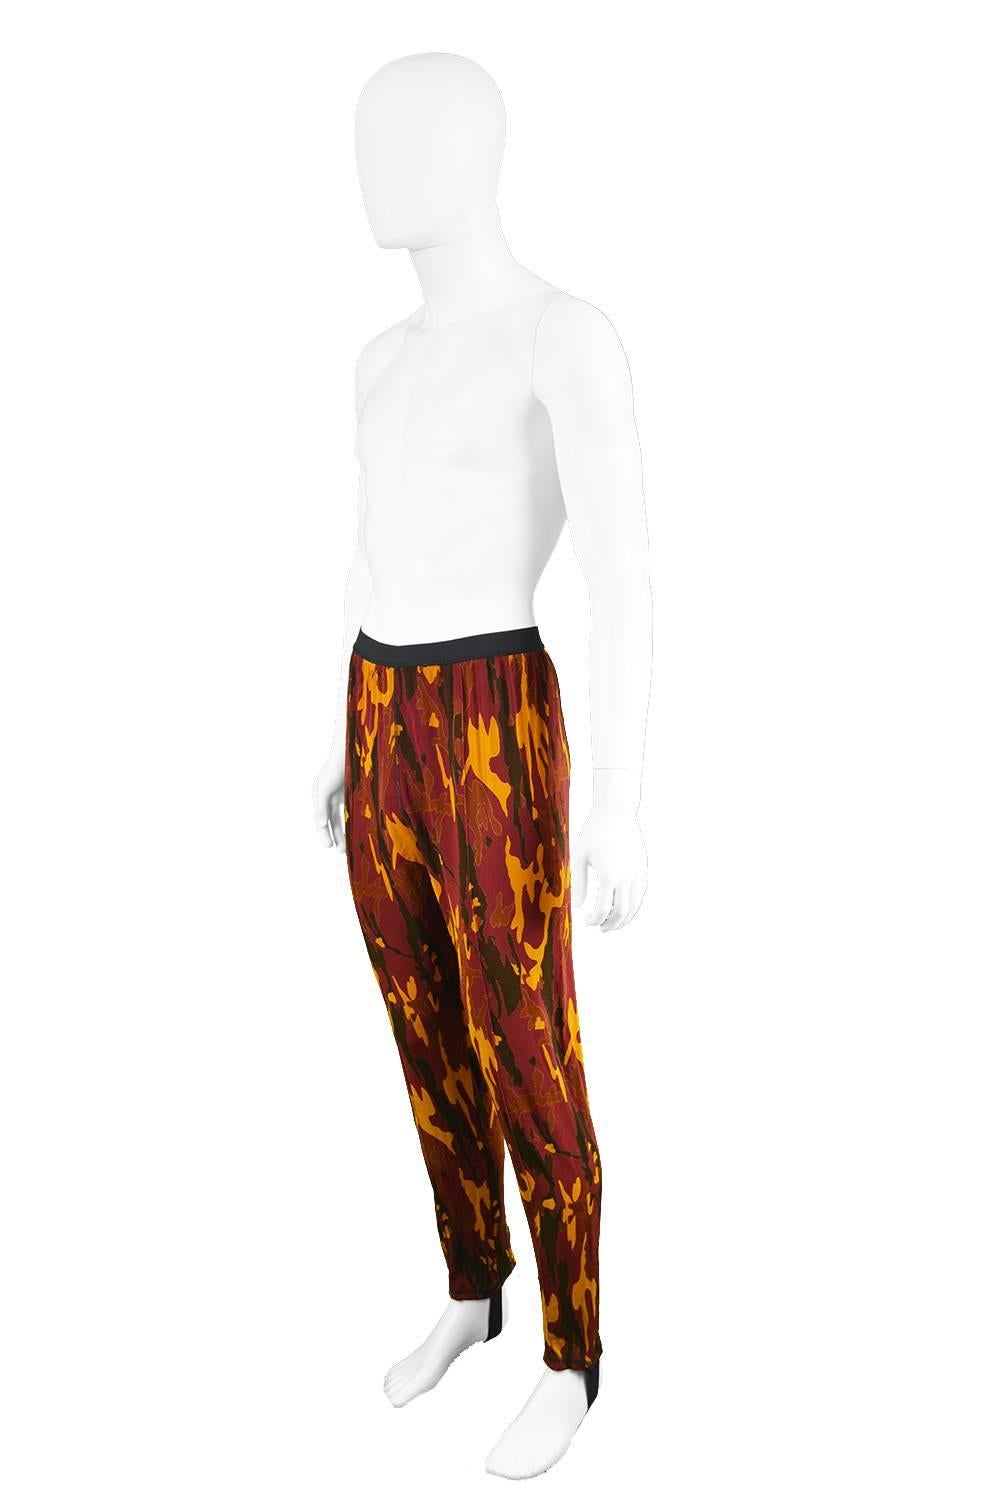 Brown Jean Paul Gaultier Men's Red Camouflage Knit Pants with Stirrup Details, 1980s For Sale